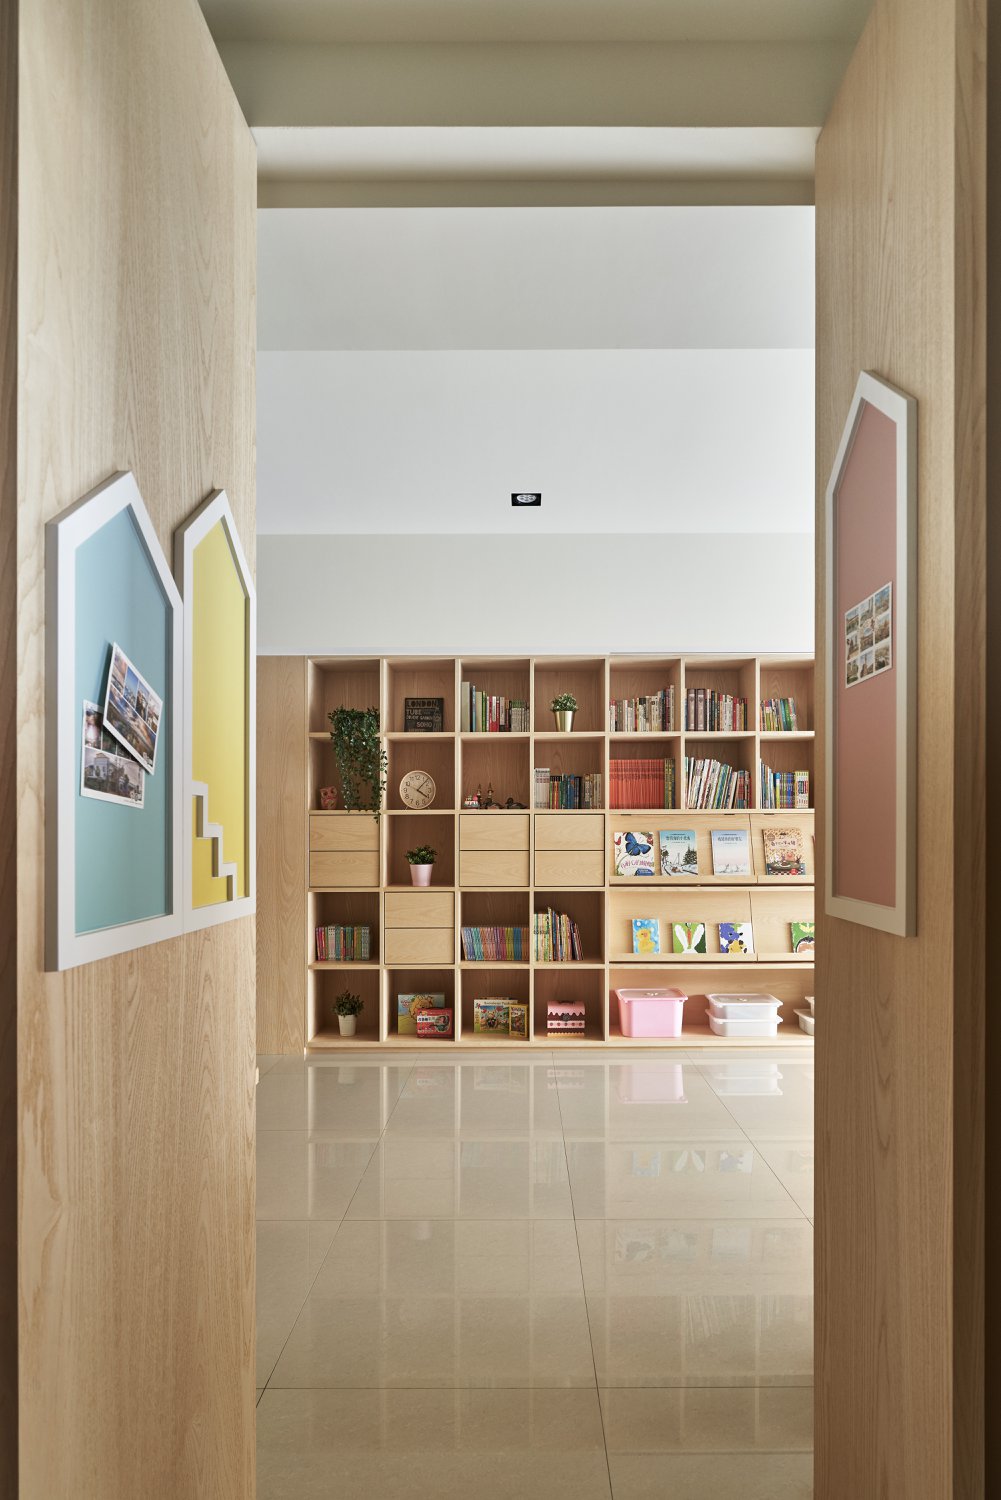 A modern shelving unit with open storage, drawers, book displays, whiteboard walls, and a hidden tv.